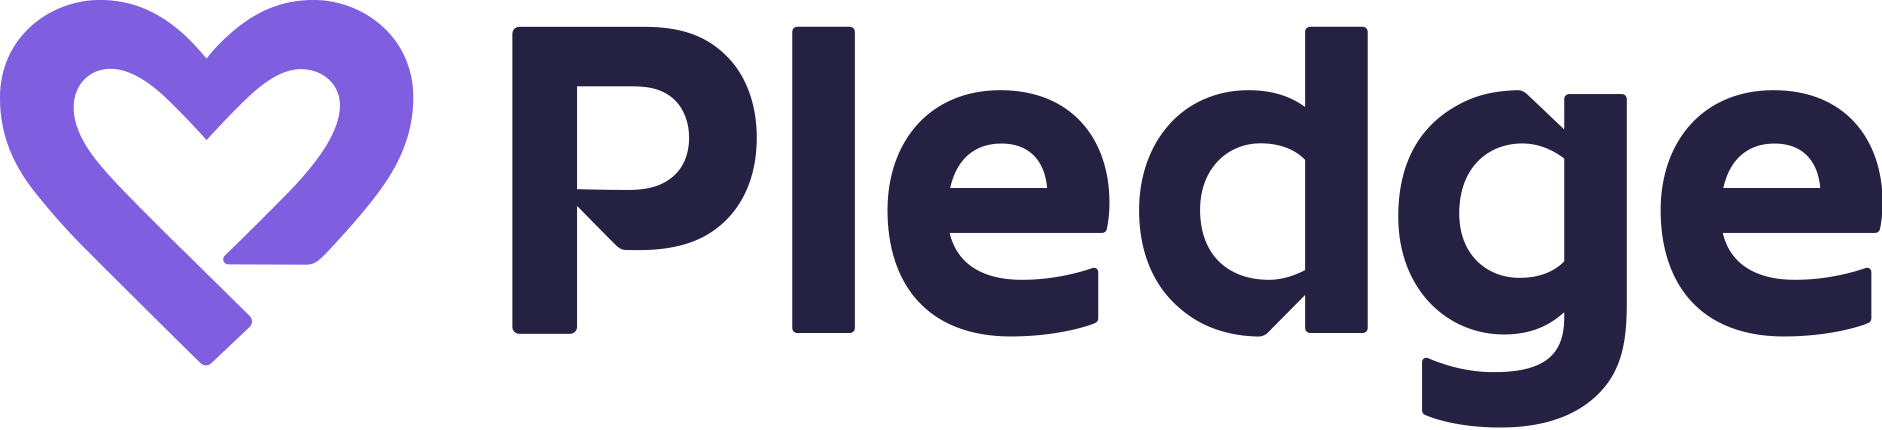 , Pledge Giving Platform Launches World’s First “Free the Fee” Initiative to Eliminate Credit Card Fees Charged to Charity and Unlock Billions of Dollars in Funding to Nonprofits